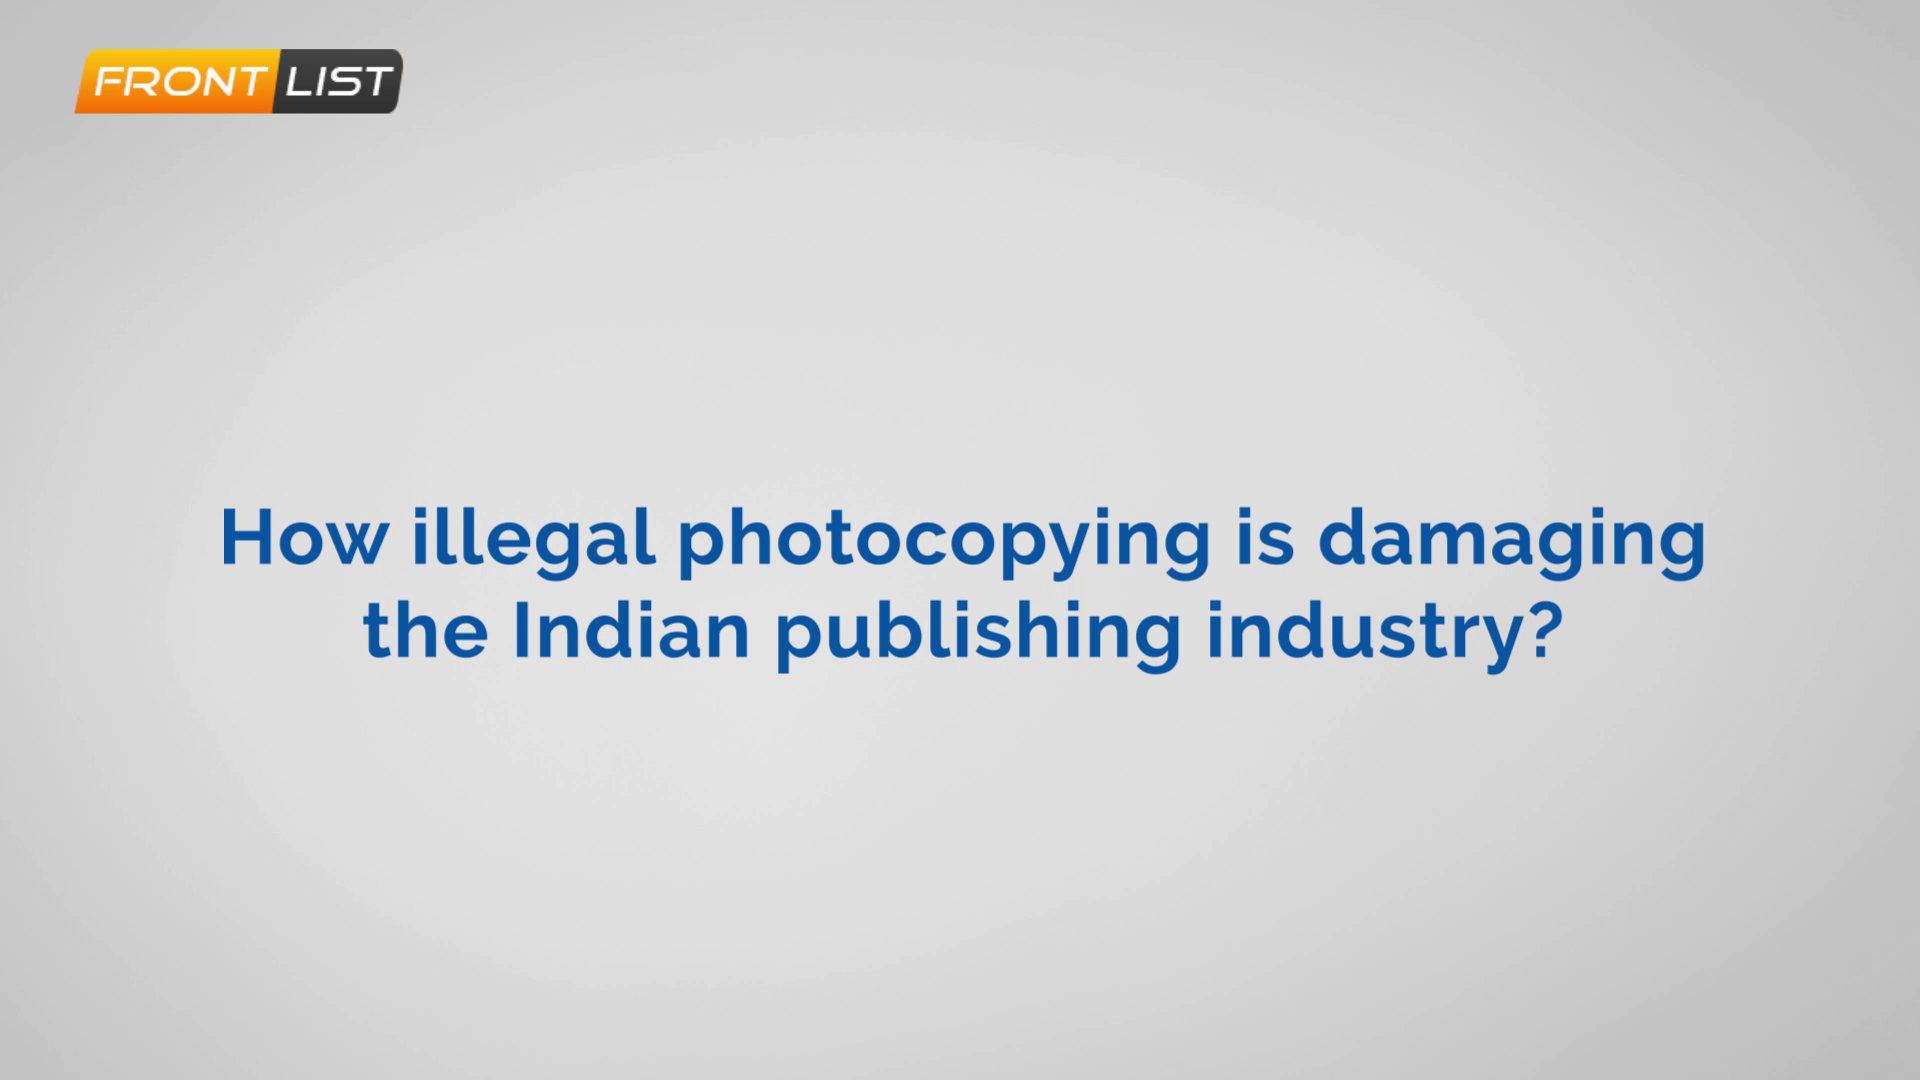 How illegal photocopying is damaging the Indian publishing industry?